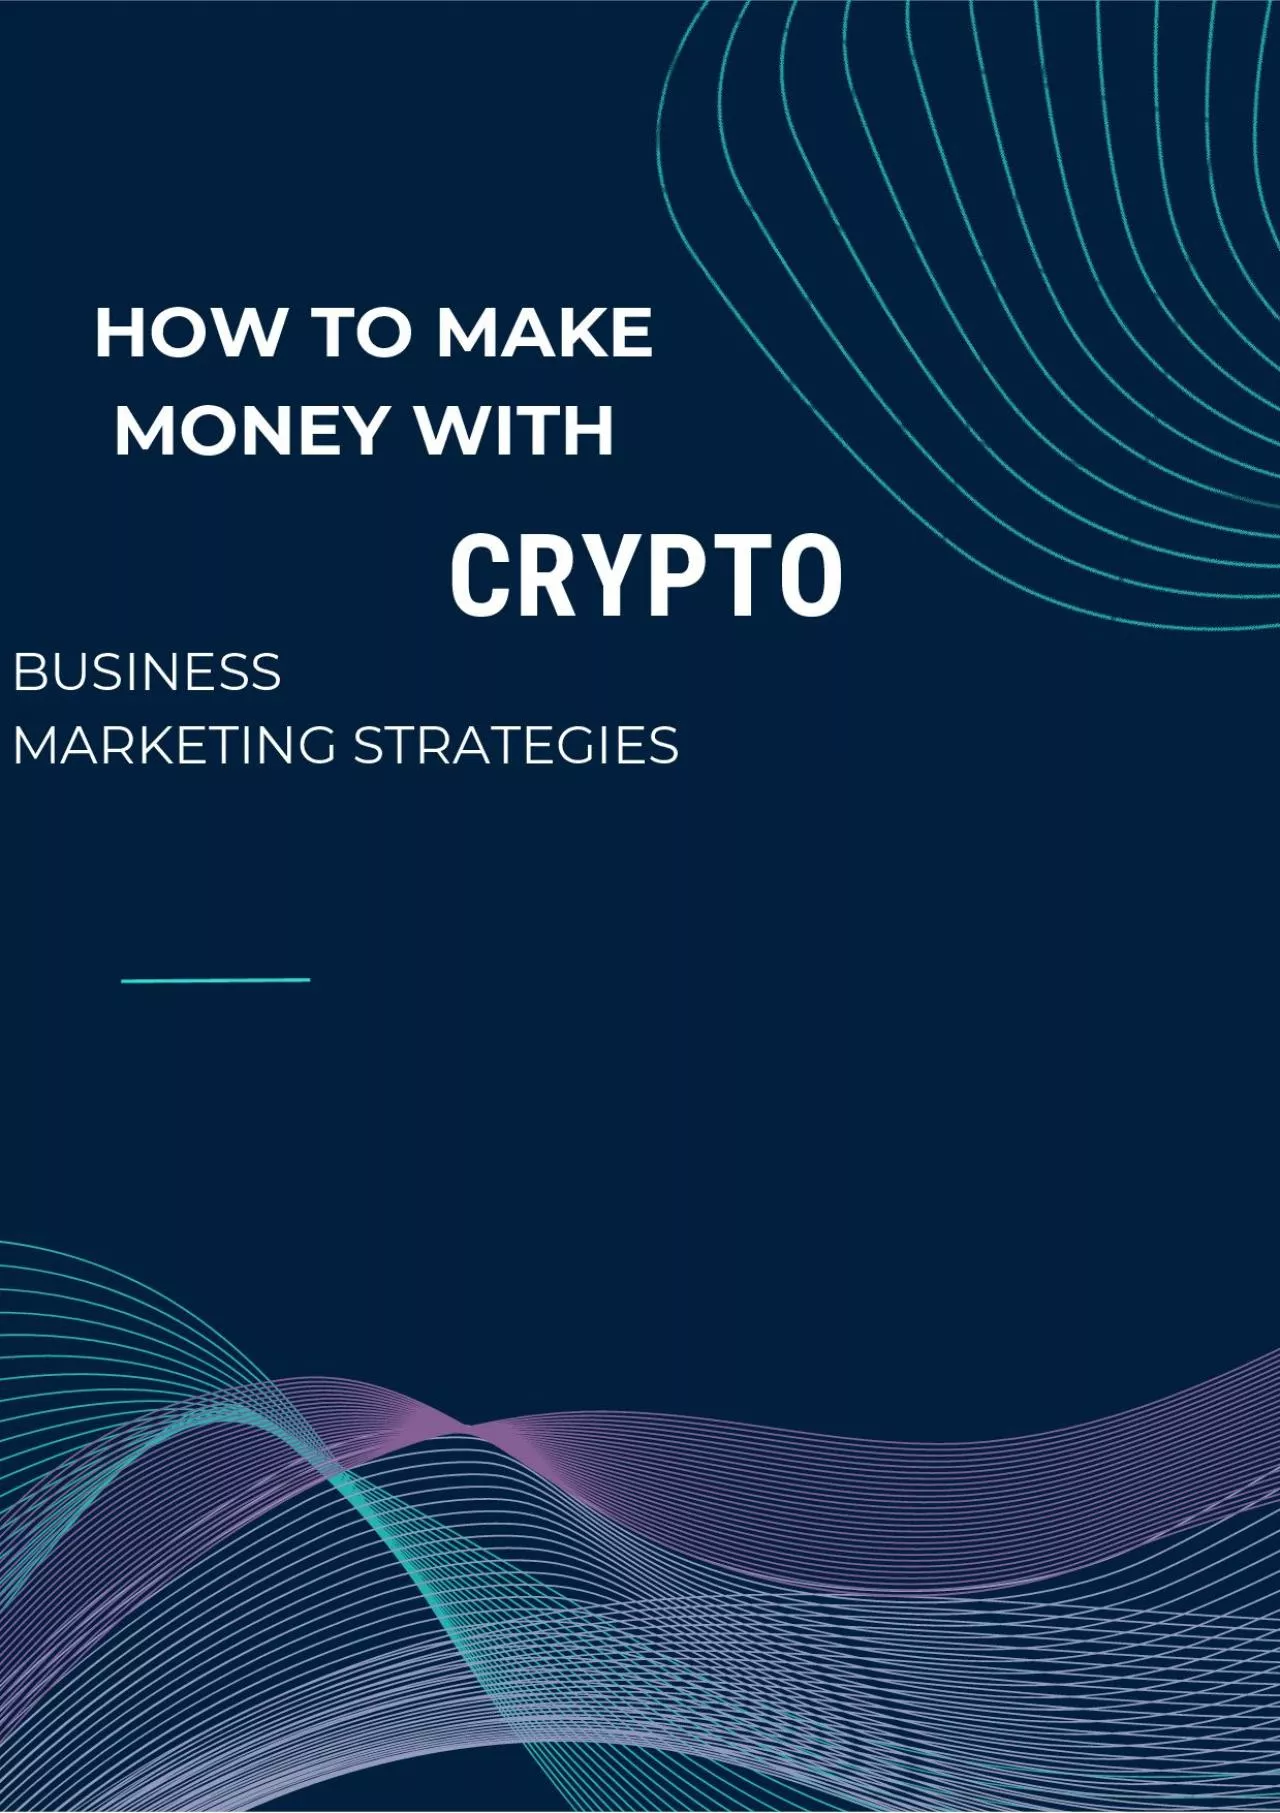 How to make money with crypto